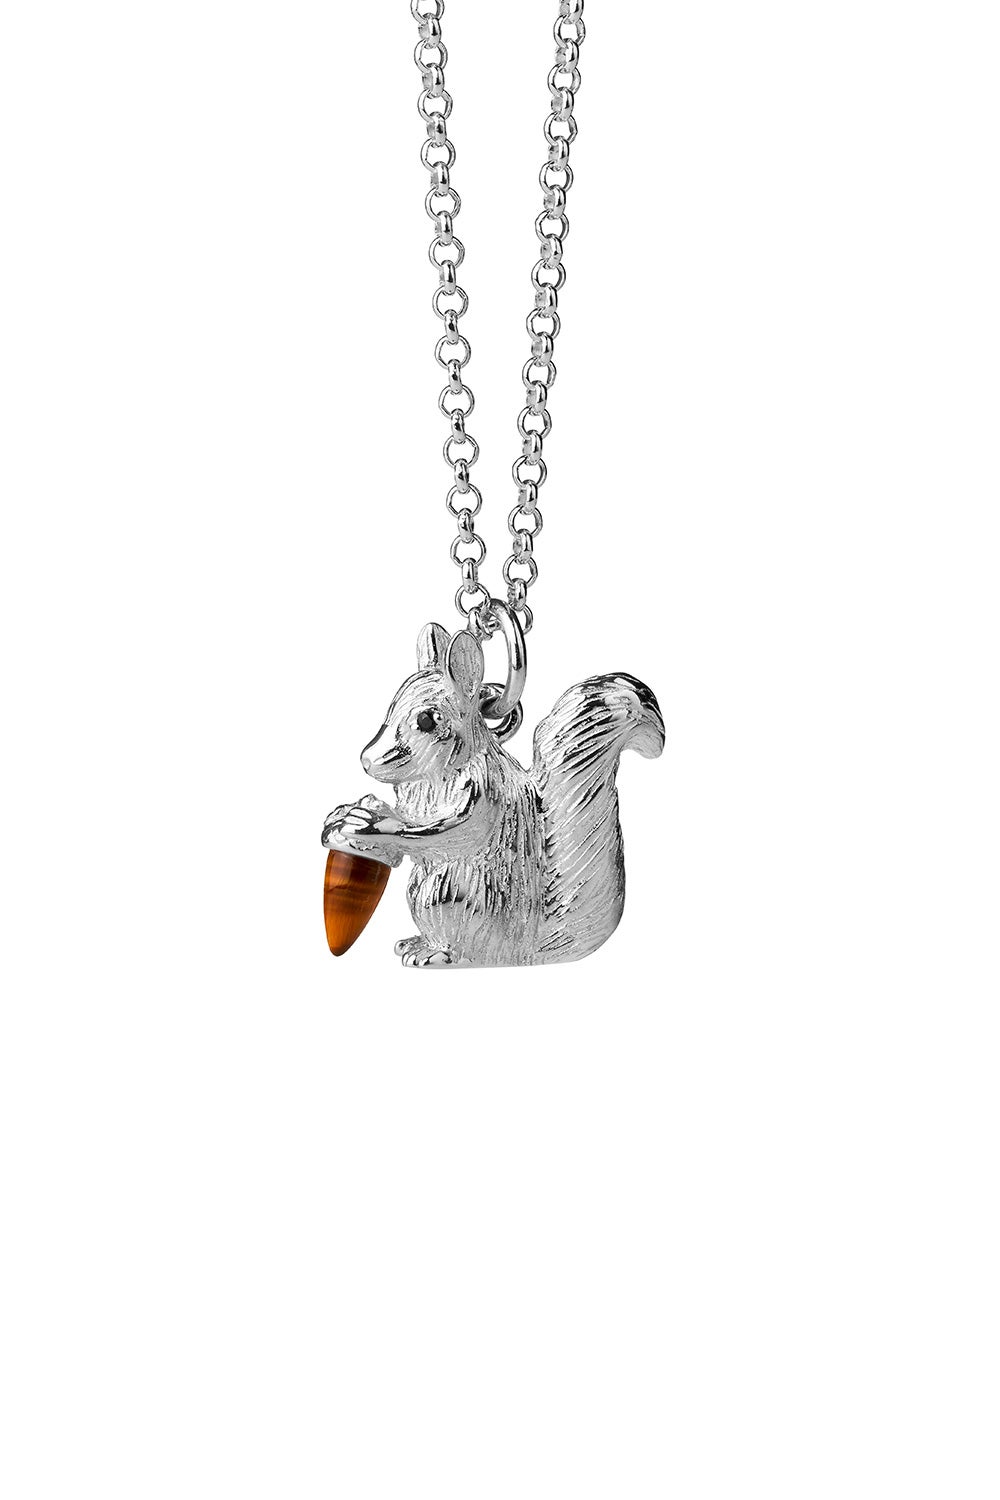 Squirrel Necklace Silver with Tiger's Eye and Black Spinel